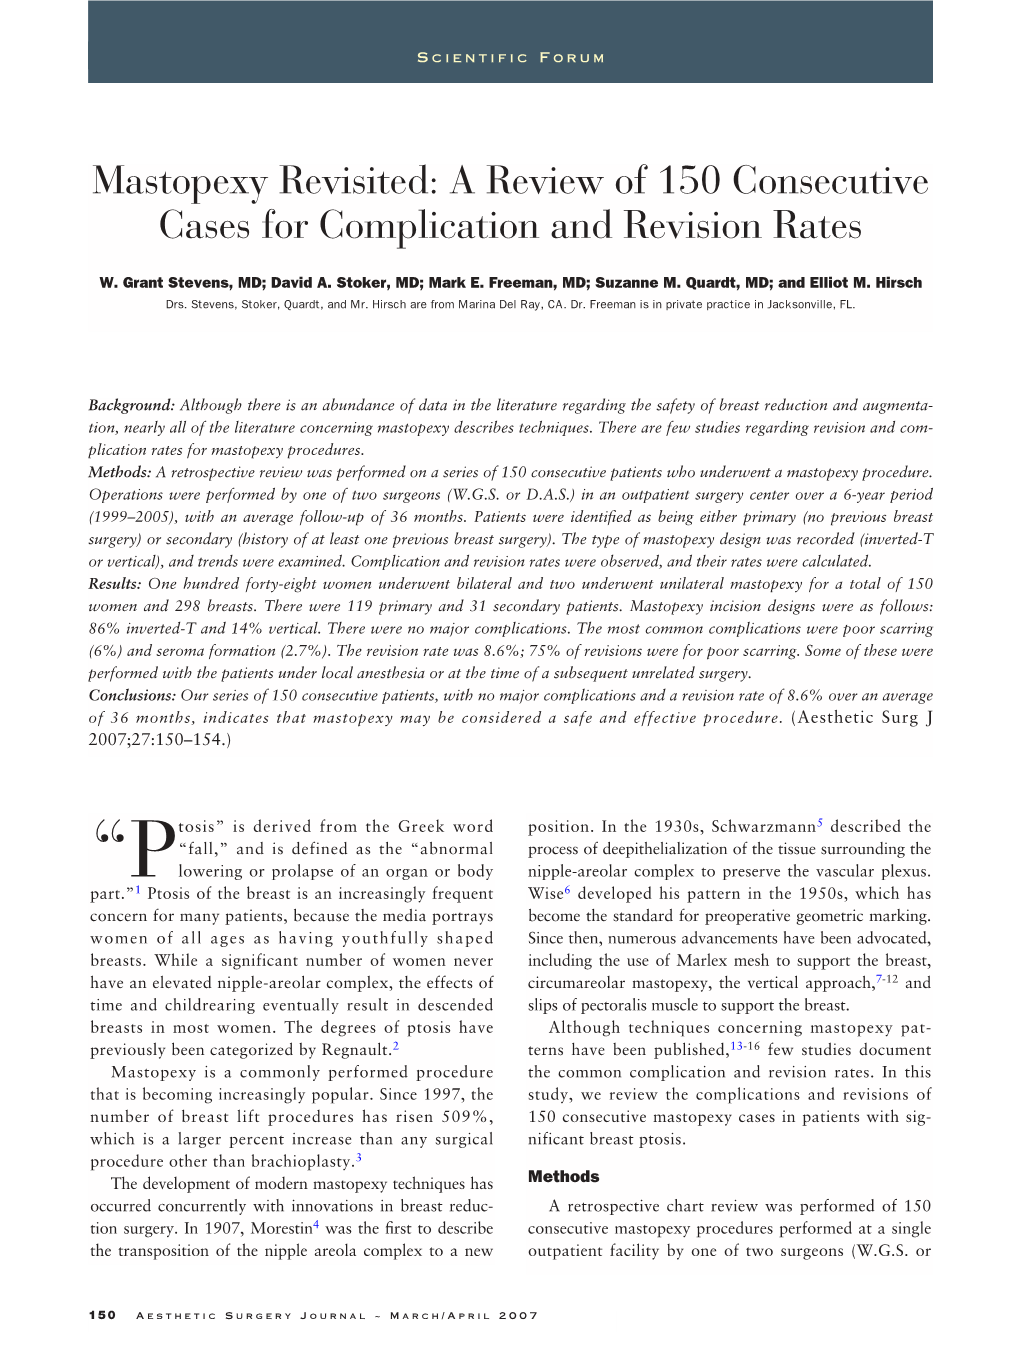 A Review of 150 Consecutive Cases for Complication and Revision Rates